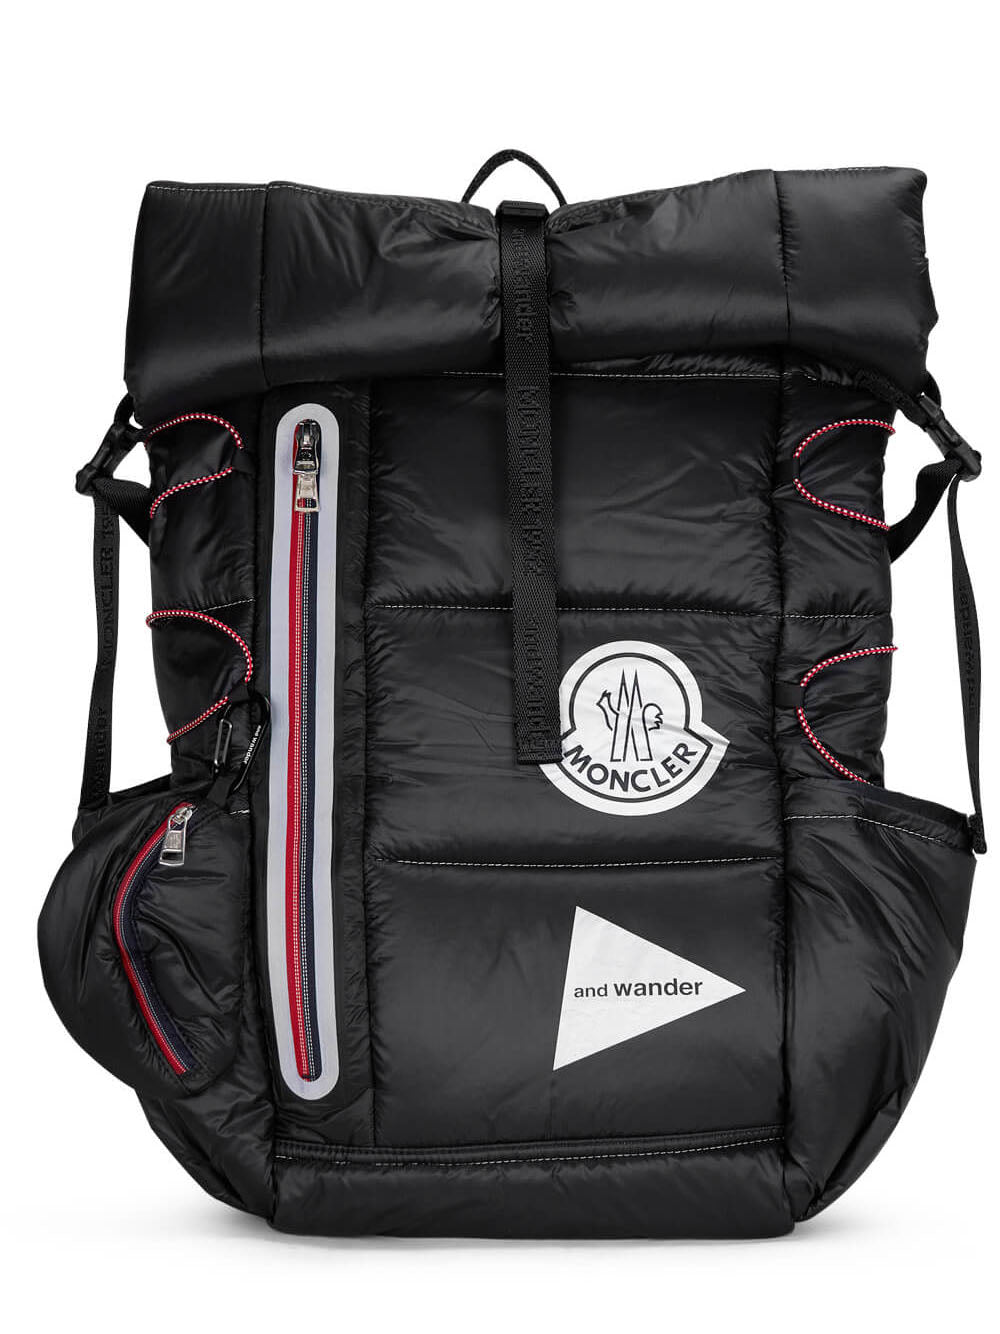 MONCLER GENIUS X 2 MONCLER 1952 Quilted And Wander Backpack - MAISONDEFASHION.COM